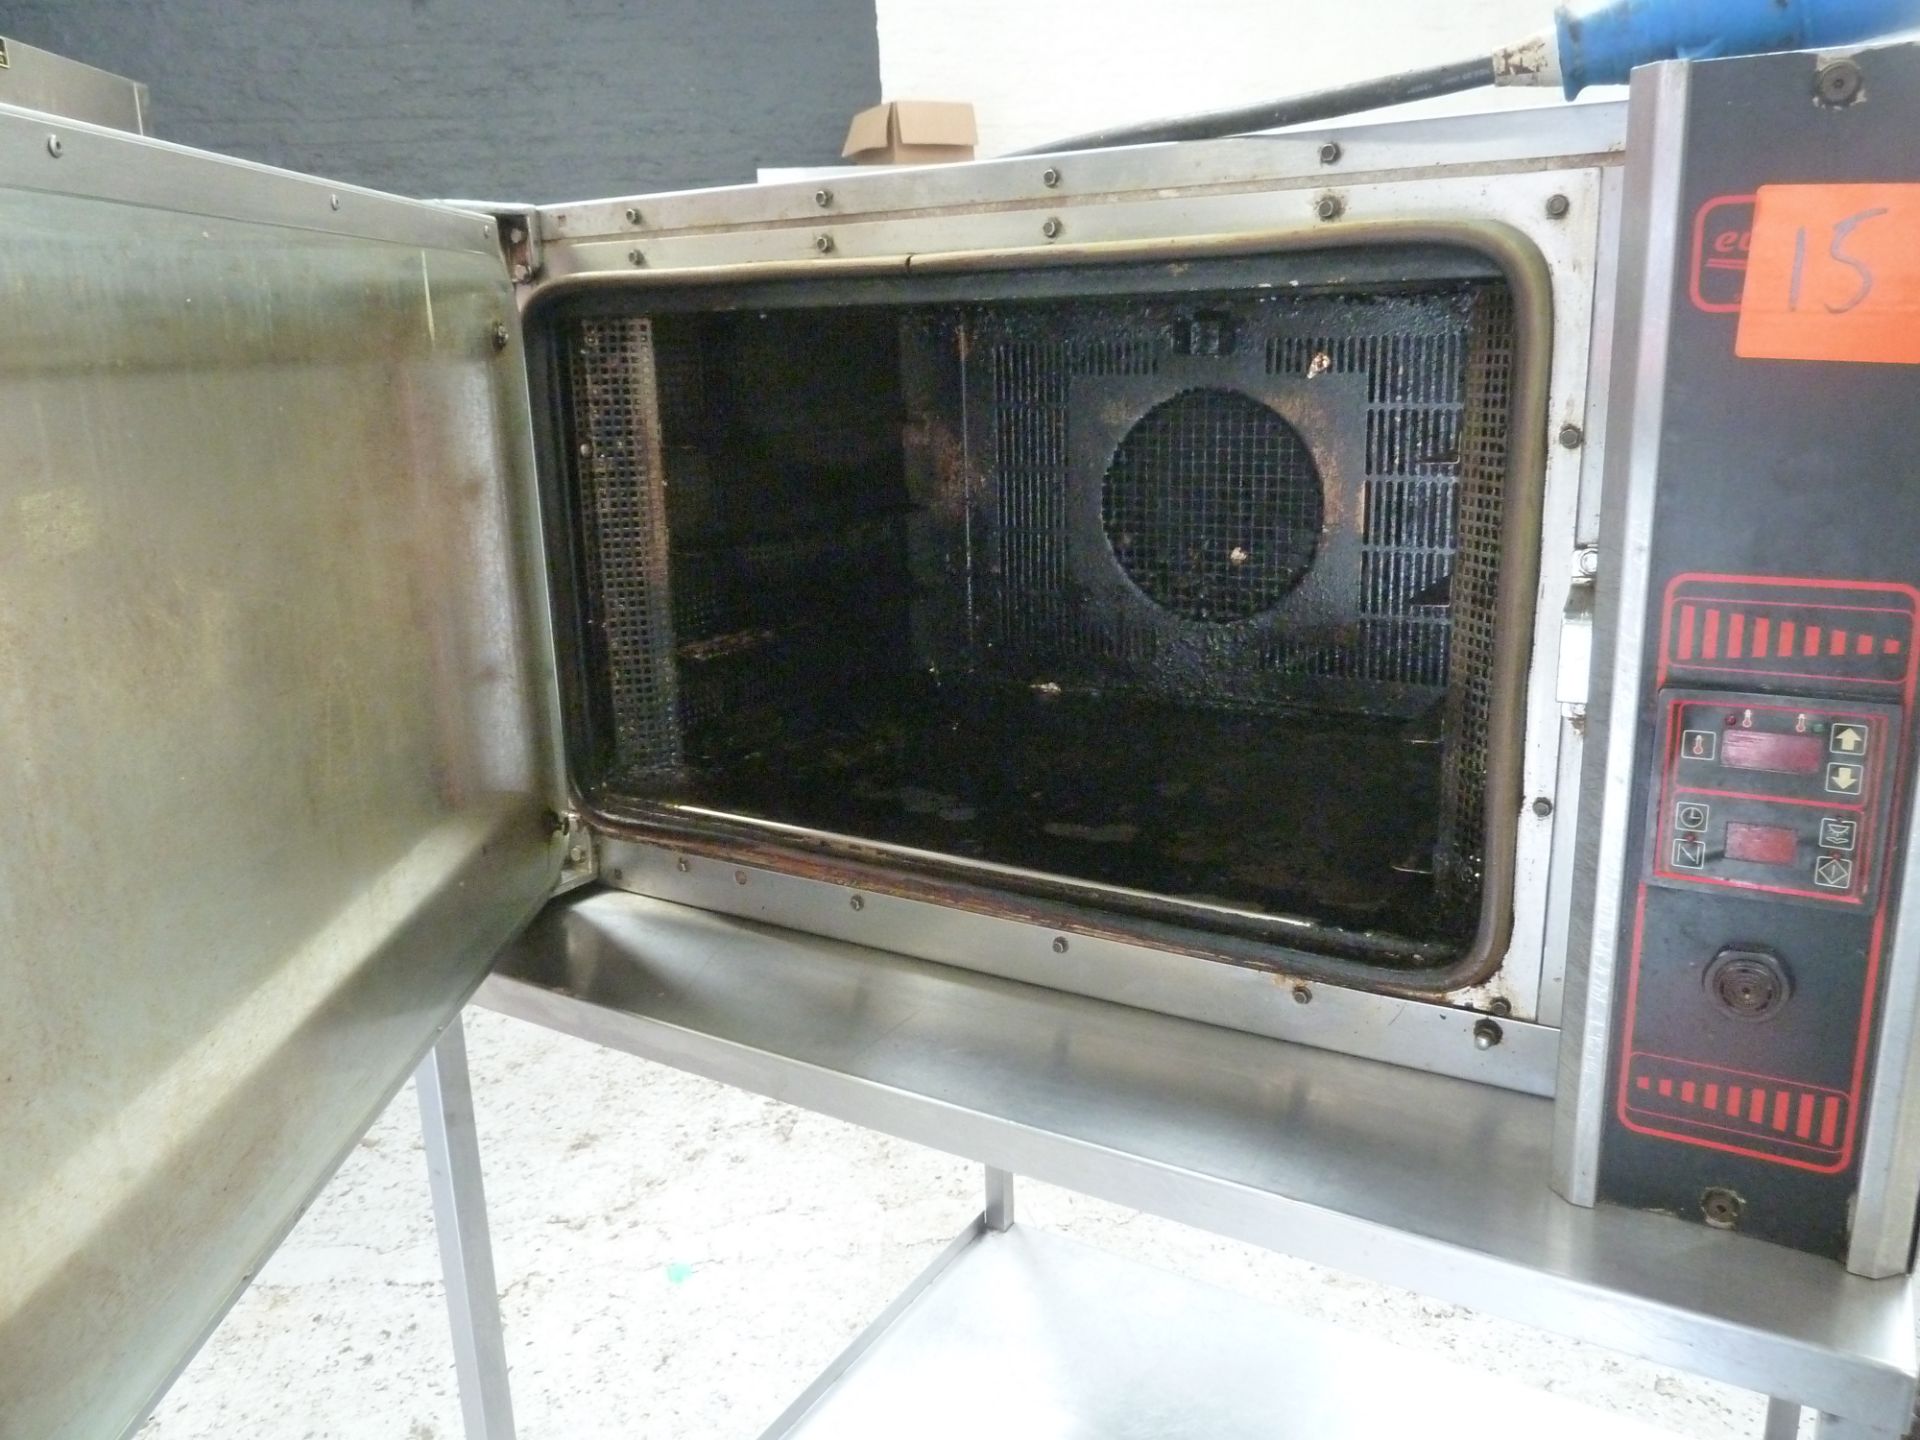 * Eurofours single bakery oven, came out of respectable and clean restaurant. - Image 5 of 5